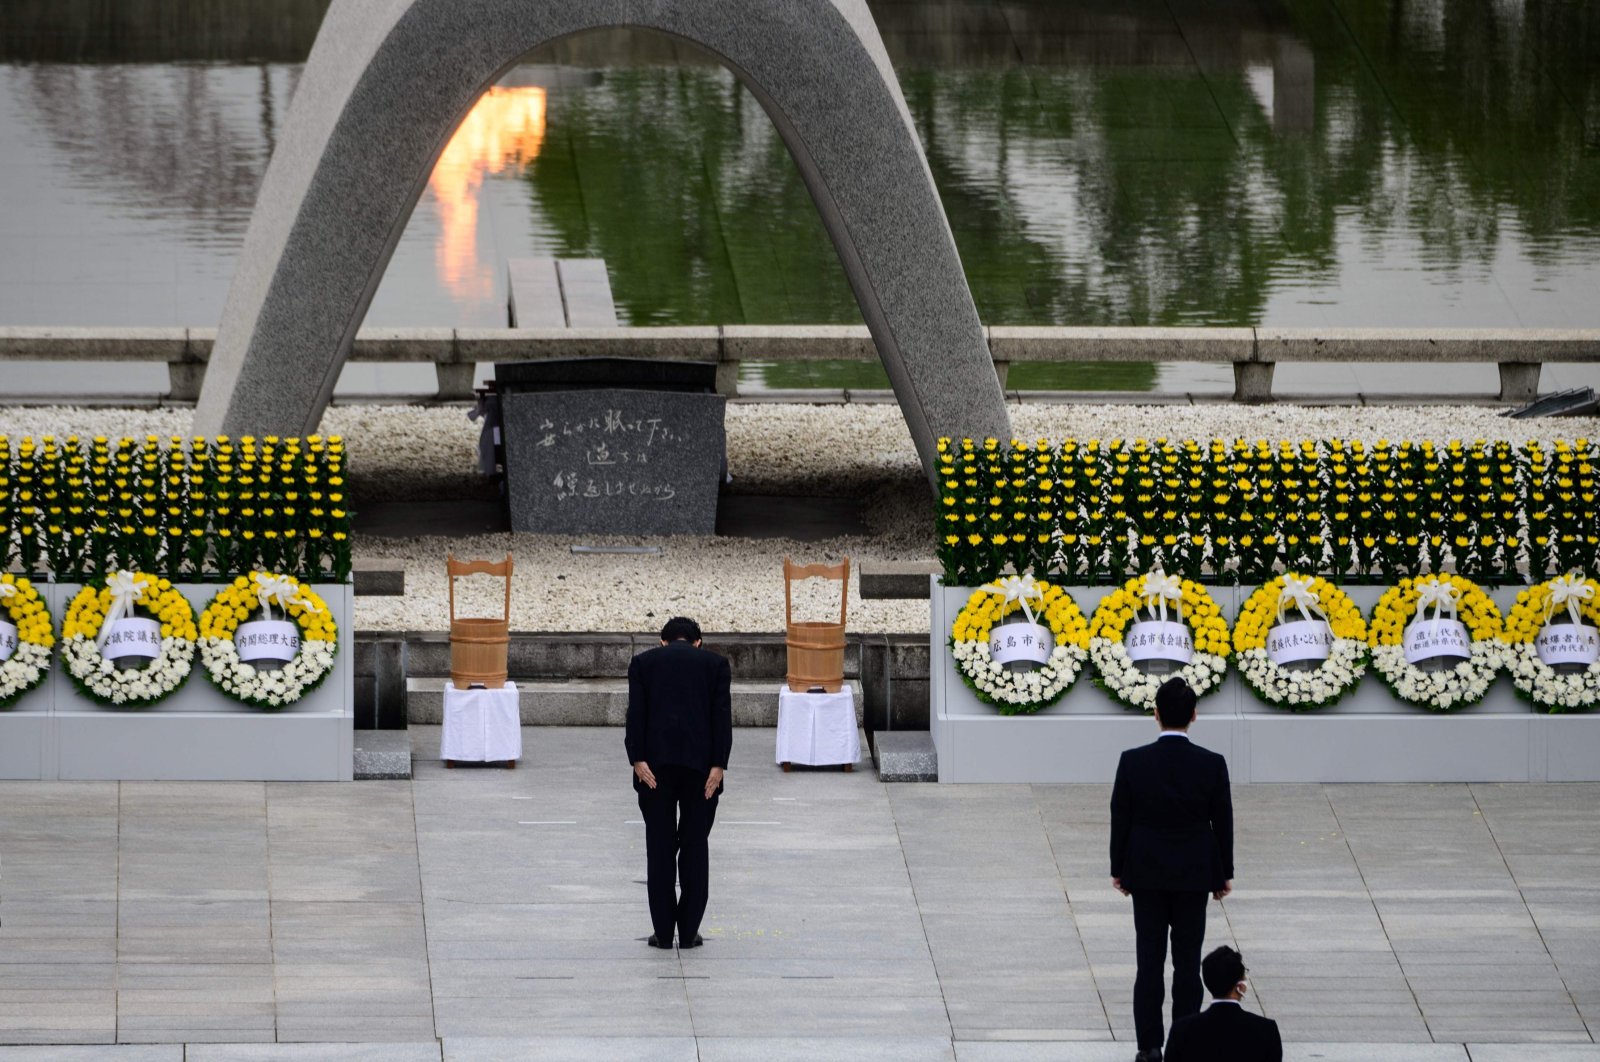 Japanese Prime Minister Shinzo Abe (C) bows in front of the Memorial Cenotaph after delivering a speech during the 75th anniversary memorial service for atomic bomb victims at the Peace Memorial Park in Hiroshima on Aug. 6, 2020. (AFP Photo)